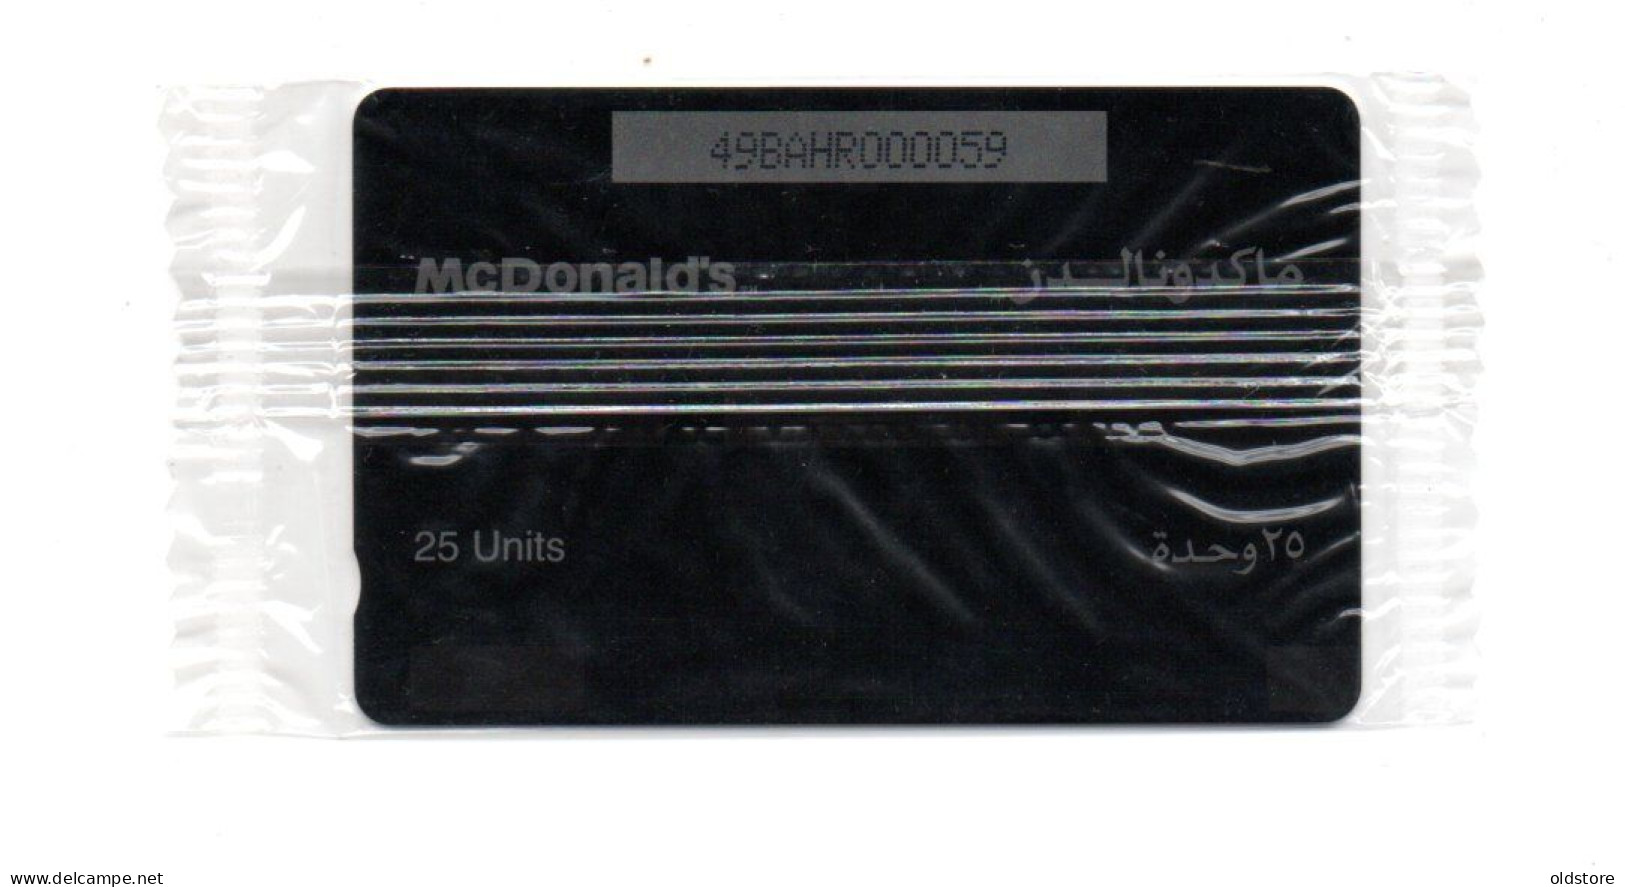 Bahrain Phonecards - Bahrain McDonald's Restaurant Offer Card Mint With Low Serial Number 000059  - Batelco -  ND 2001 - Baharain